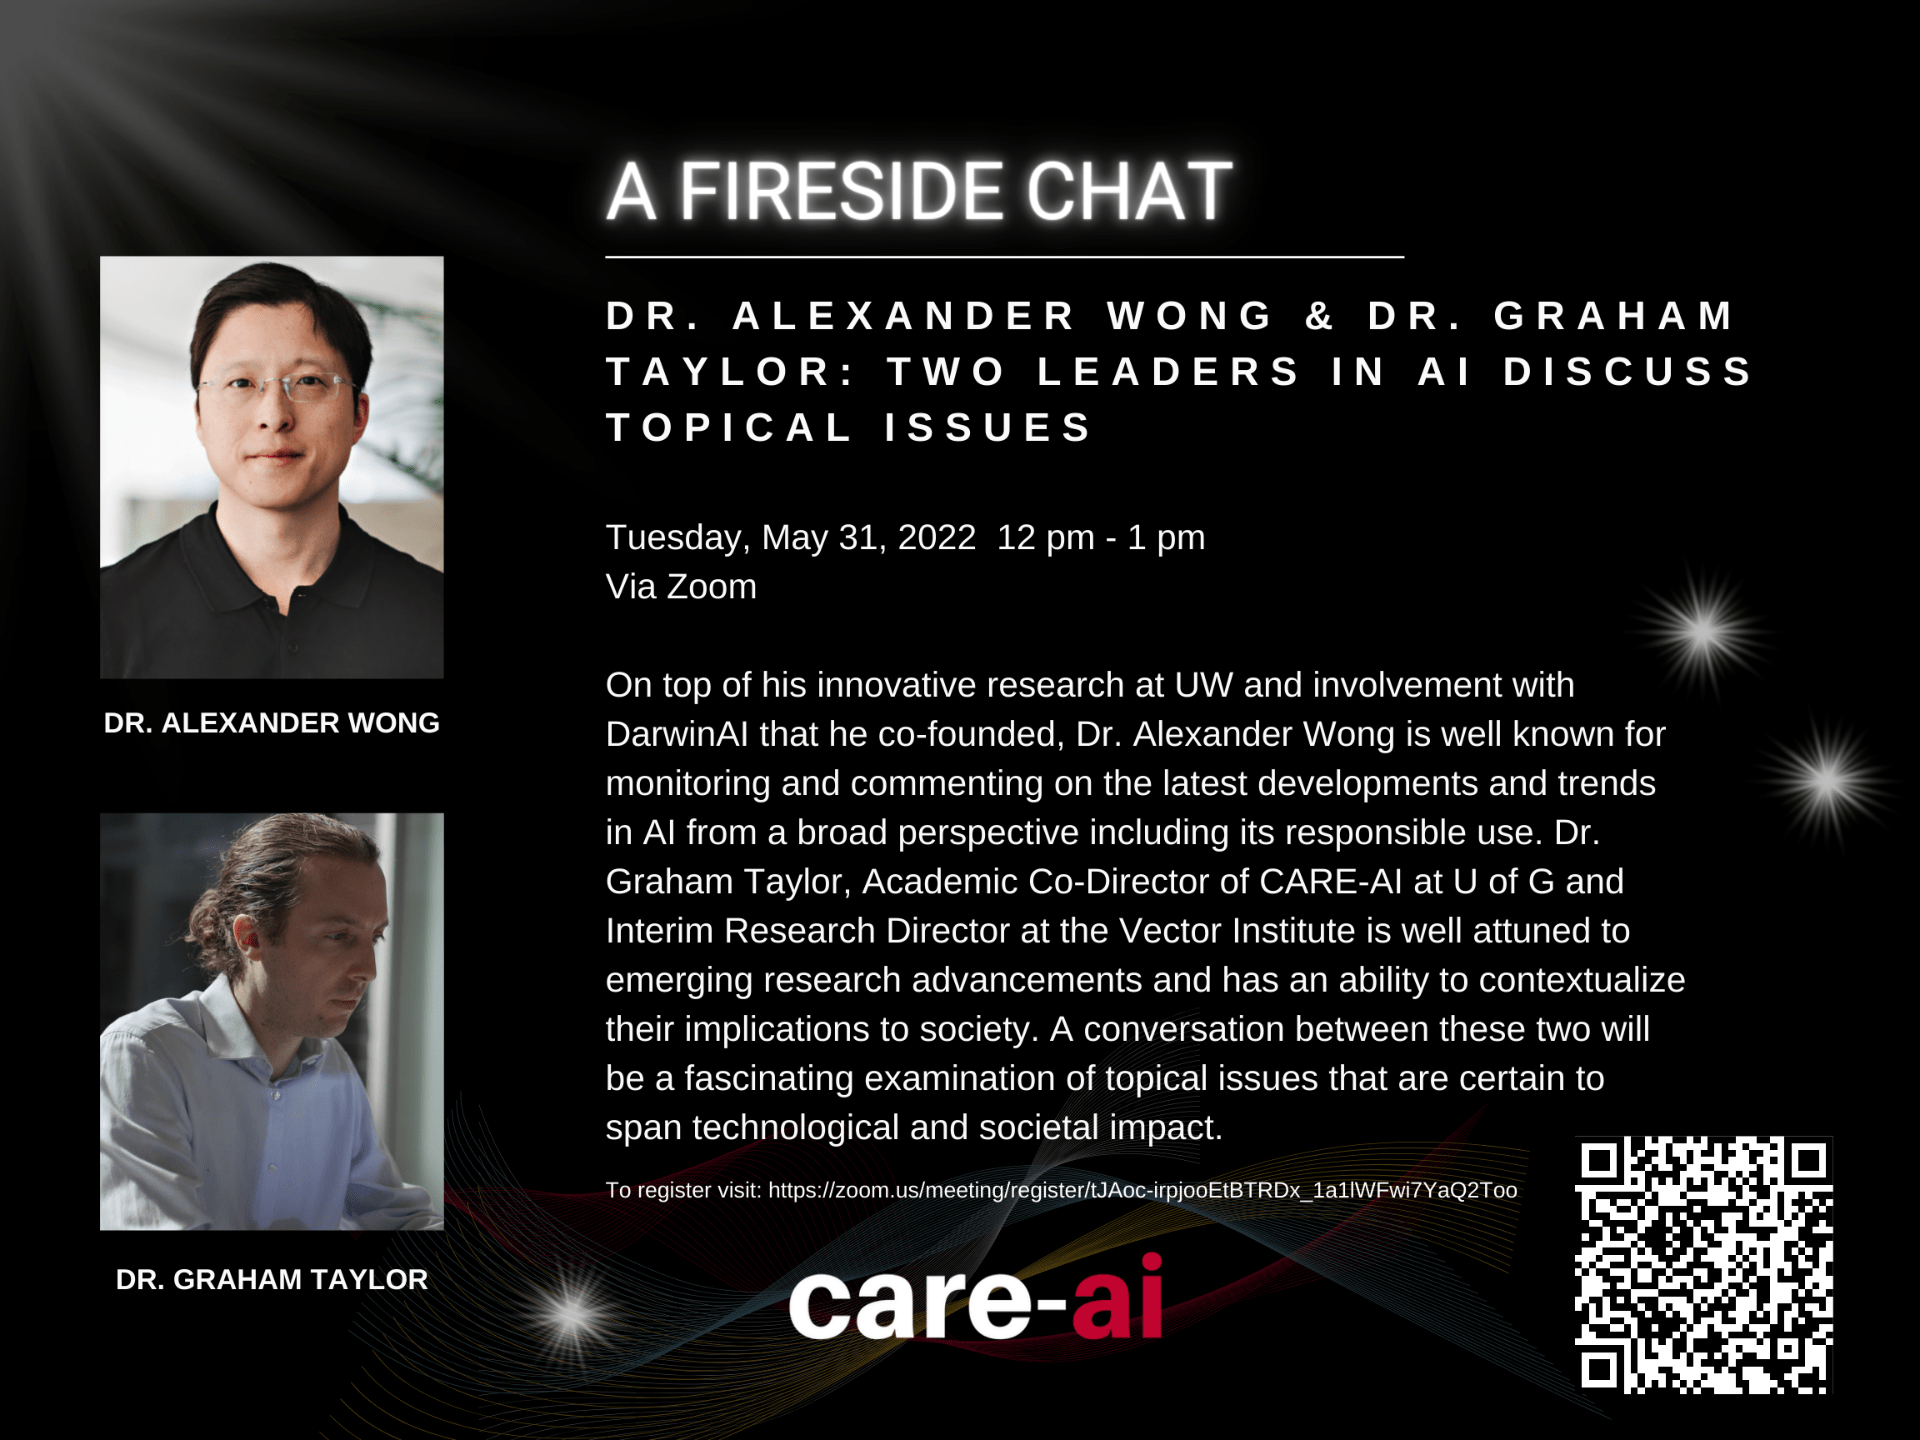 A Fireside Chat Dr. Alexander Wong and Dr. Graham Taylor: Two Leaders in AI Discuss Topical Issues Tuesday May 31, 2022 at 12 pm via Zoom